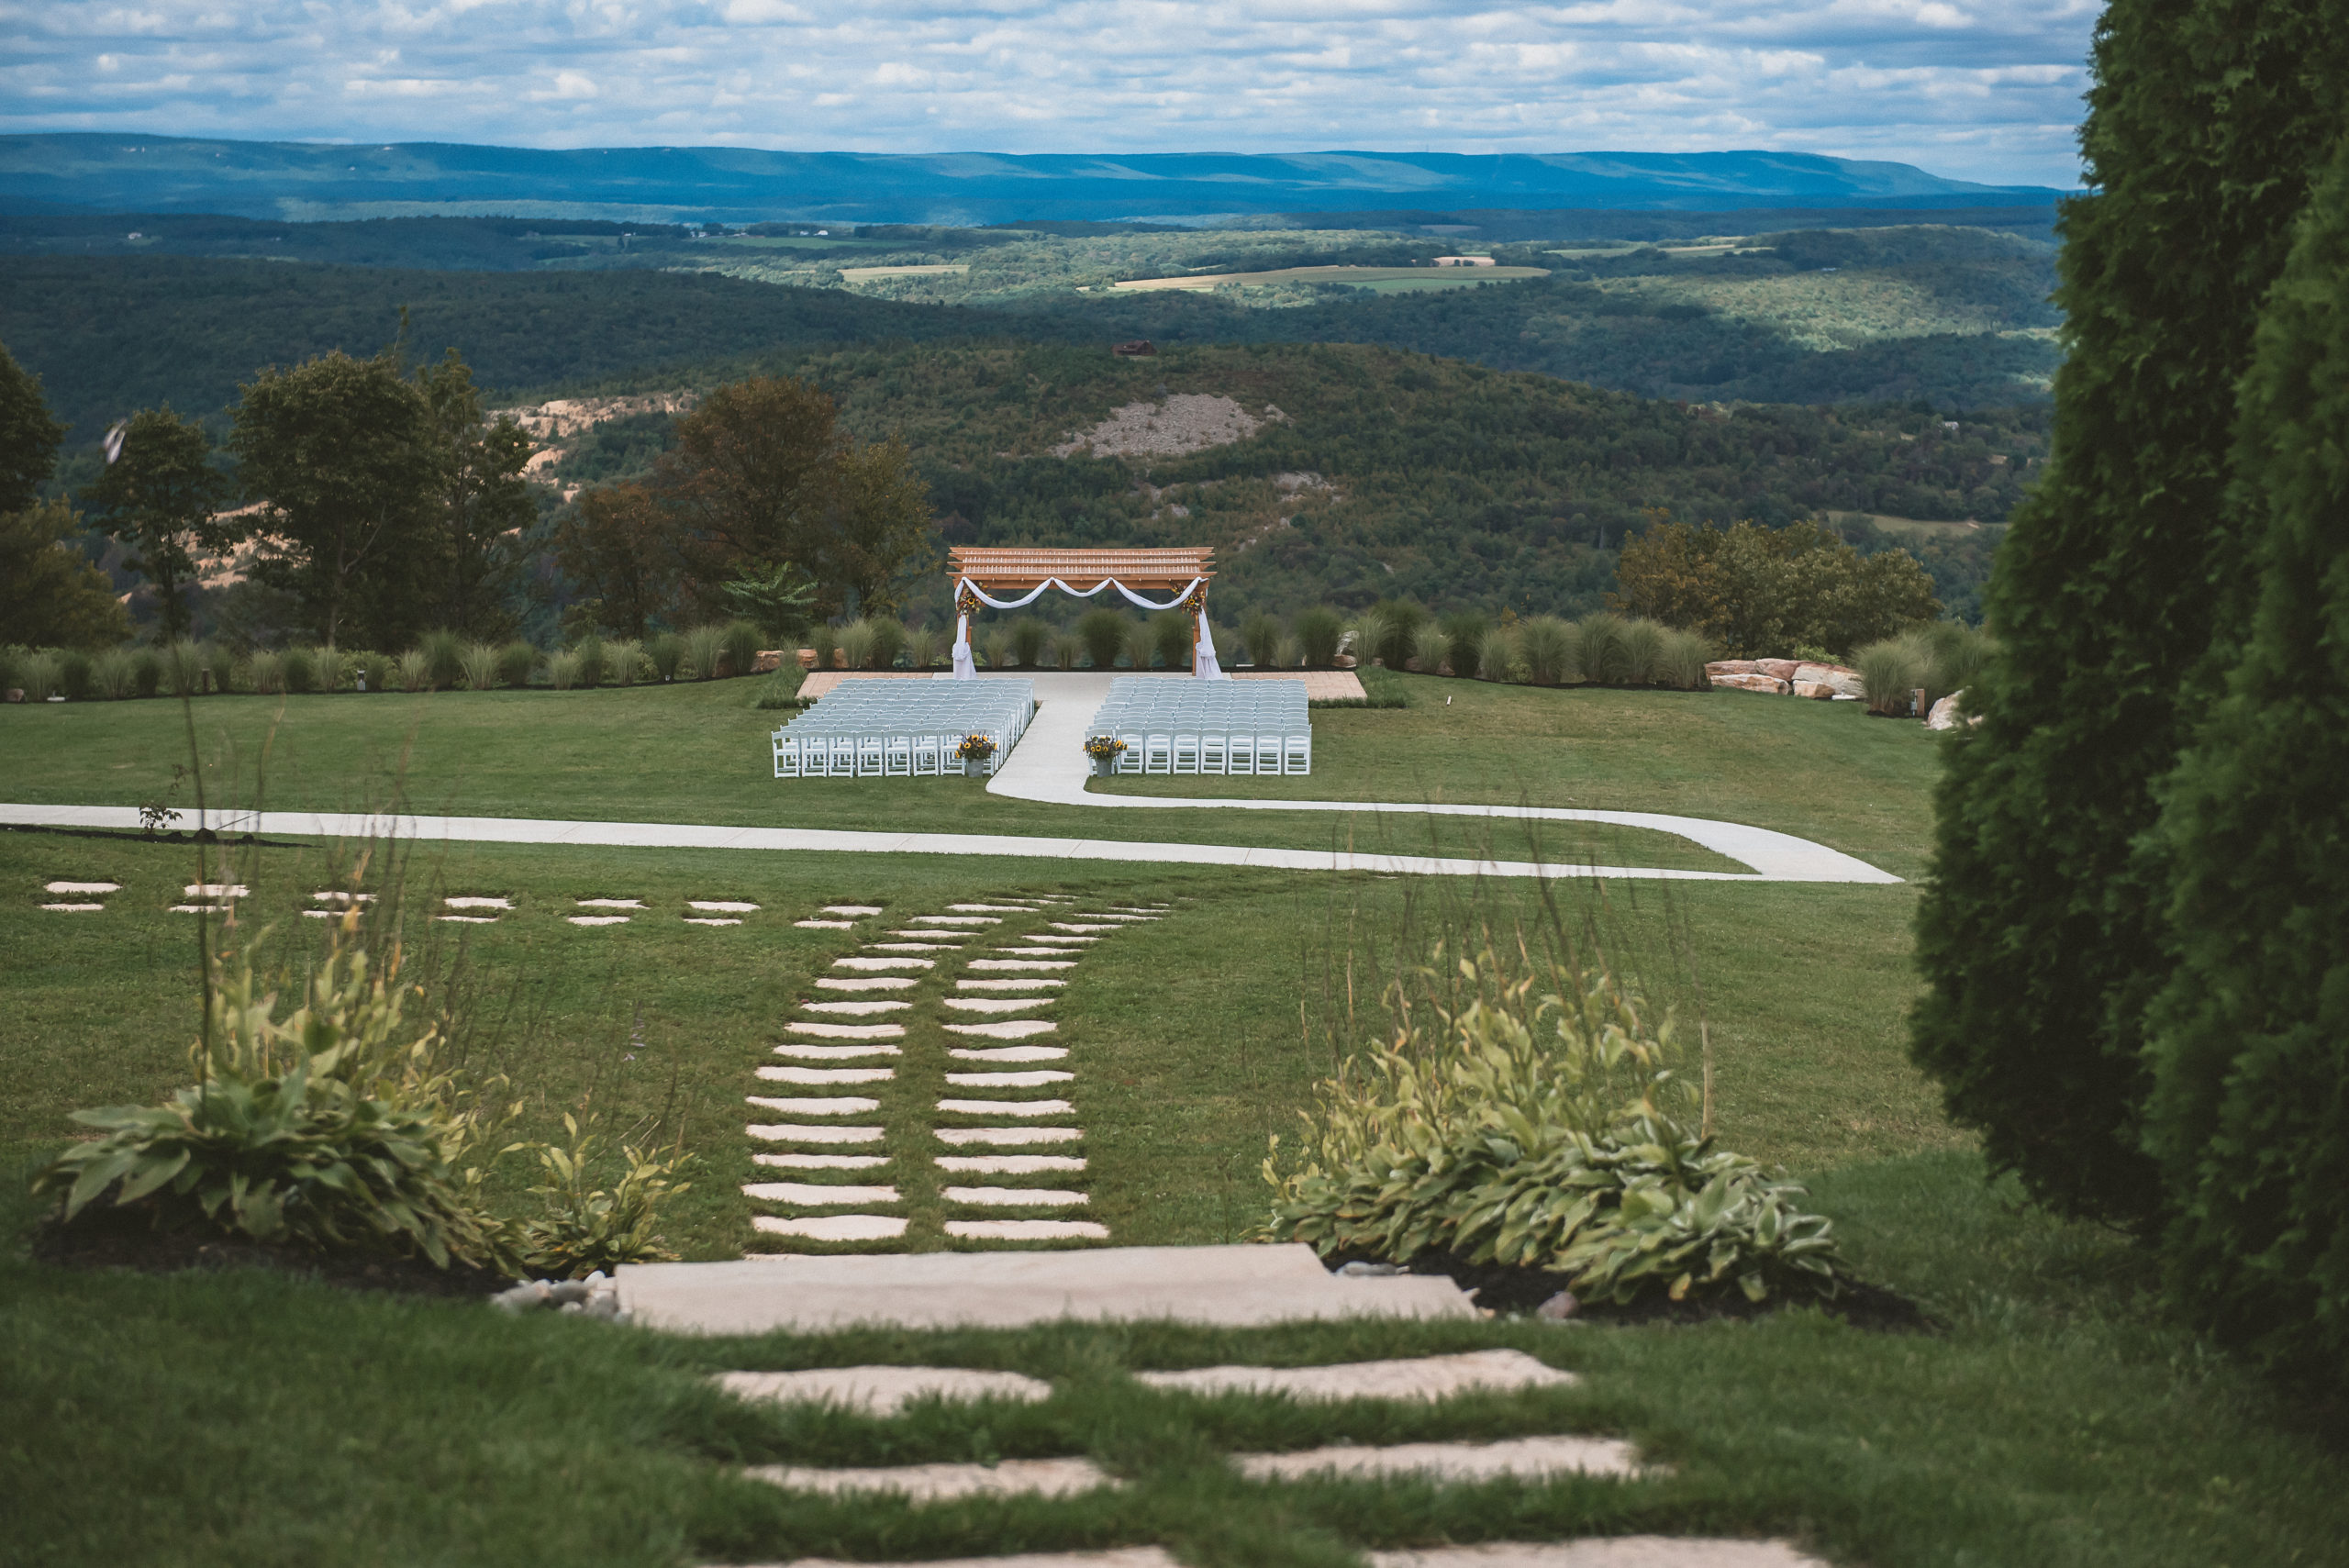 Outdoor wedding ceremony site at Blue Mountain Resort